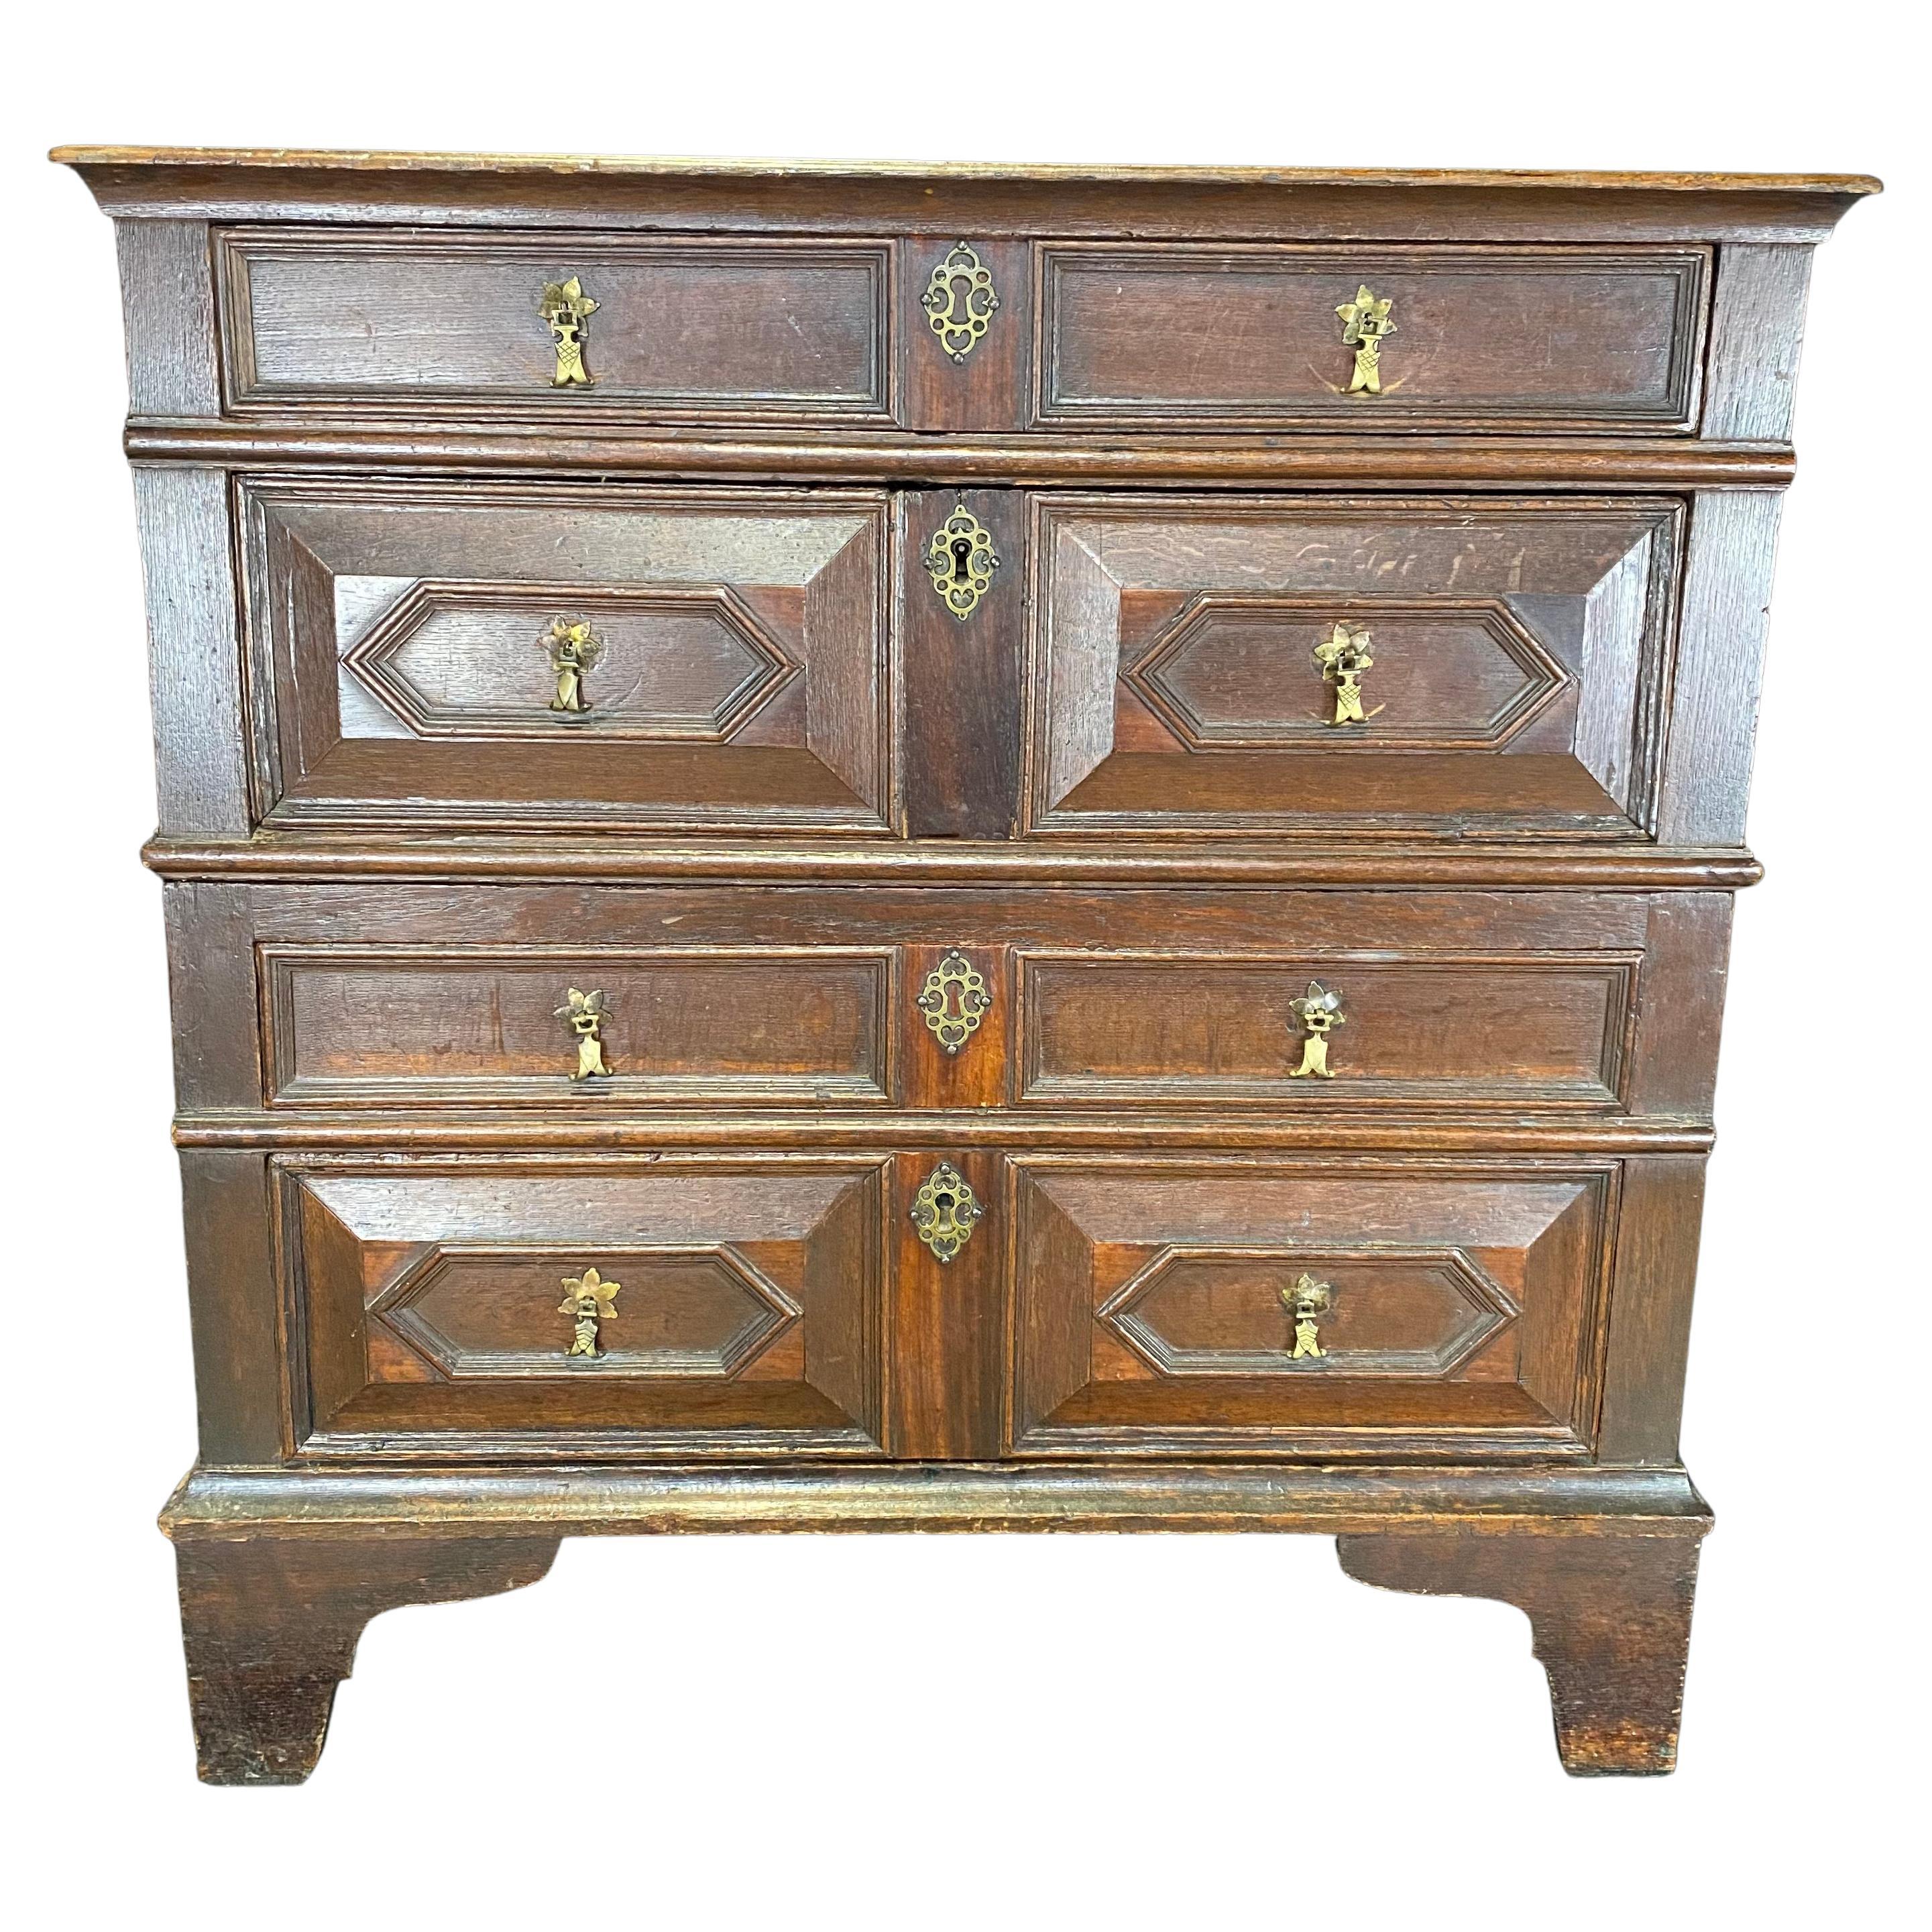 Incredible Late 17th Century British Oak Charles II Chest of Drawers Dresser For Sale